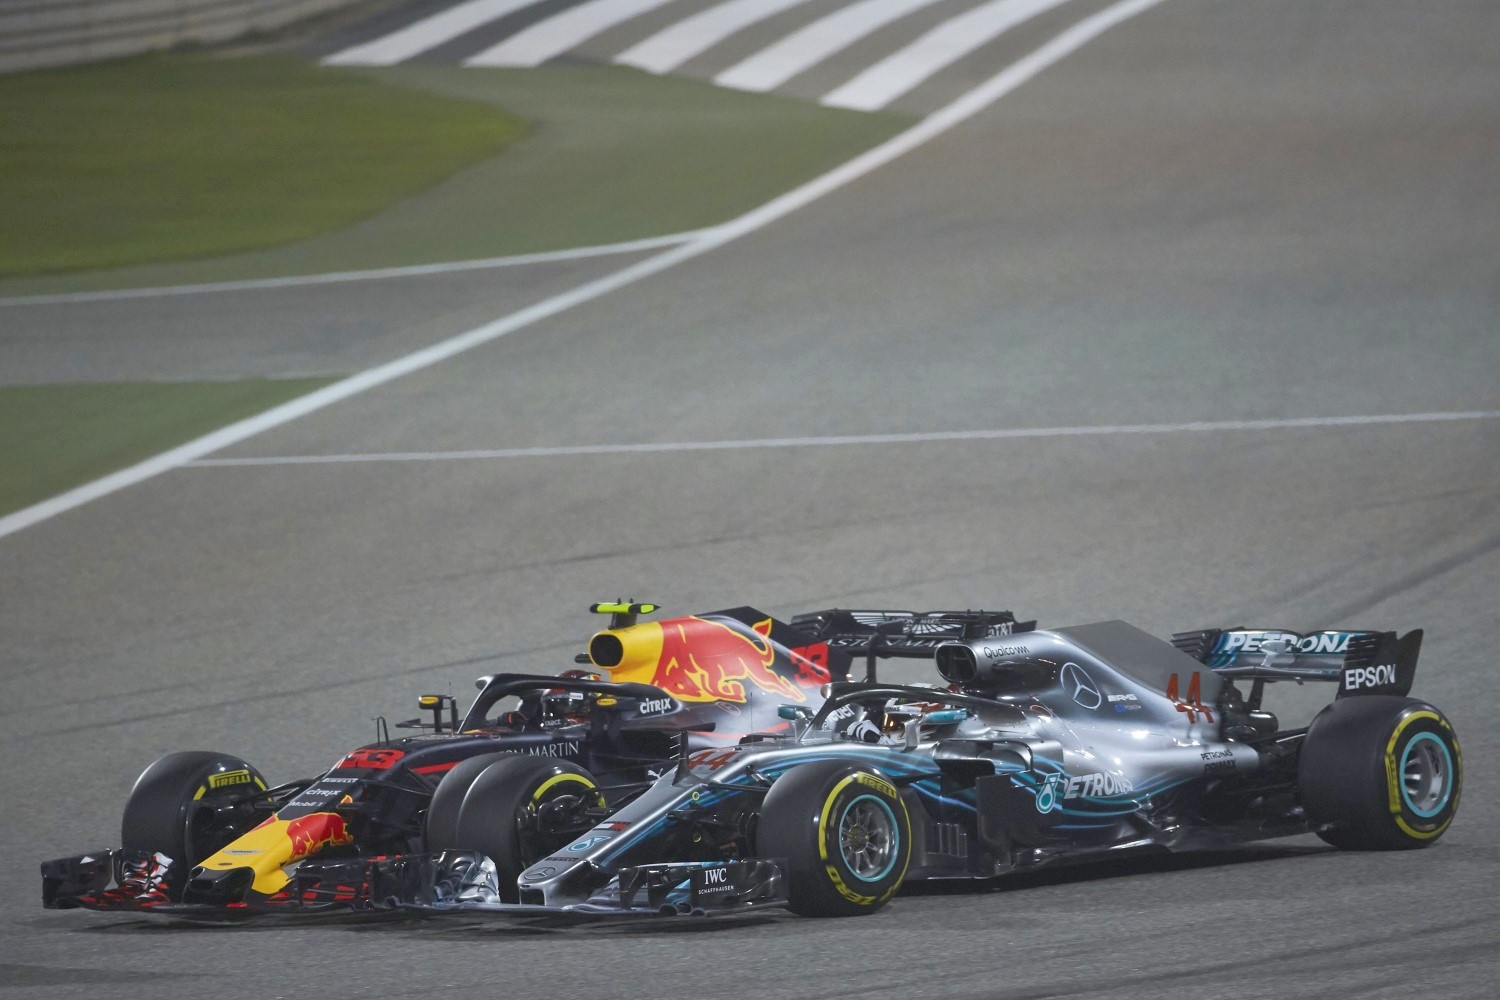 Verstappen hits Hamilton, takes himself out